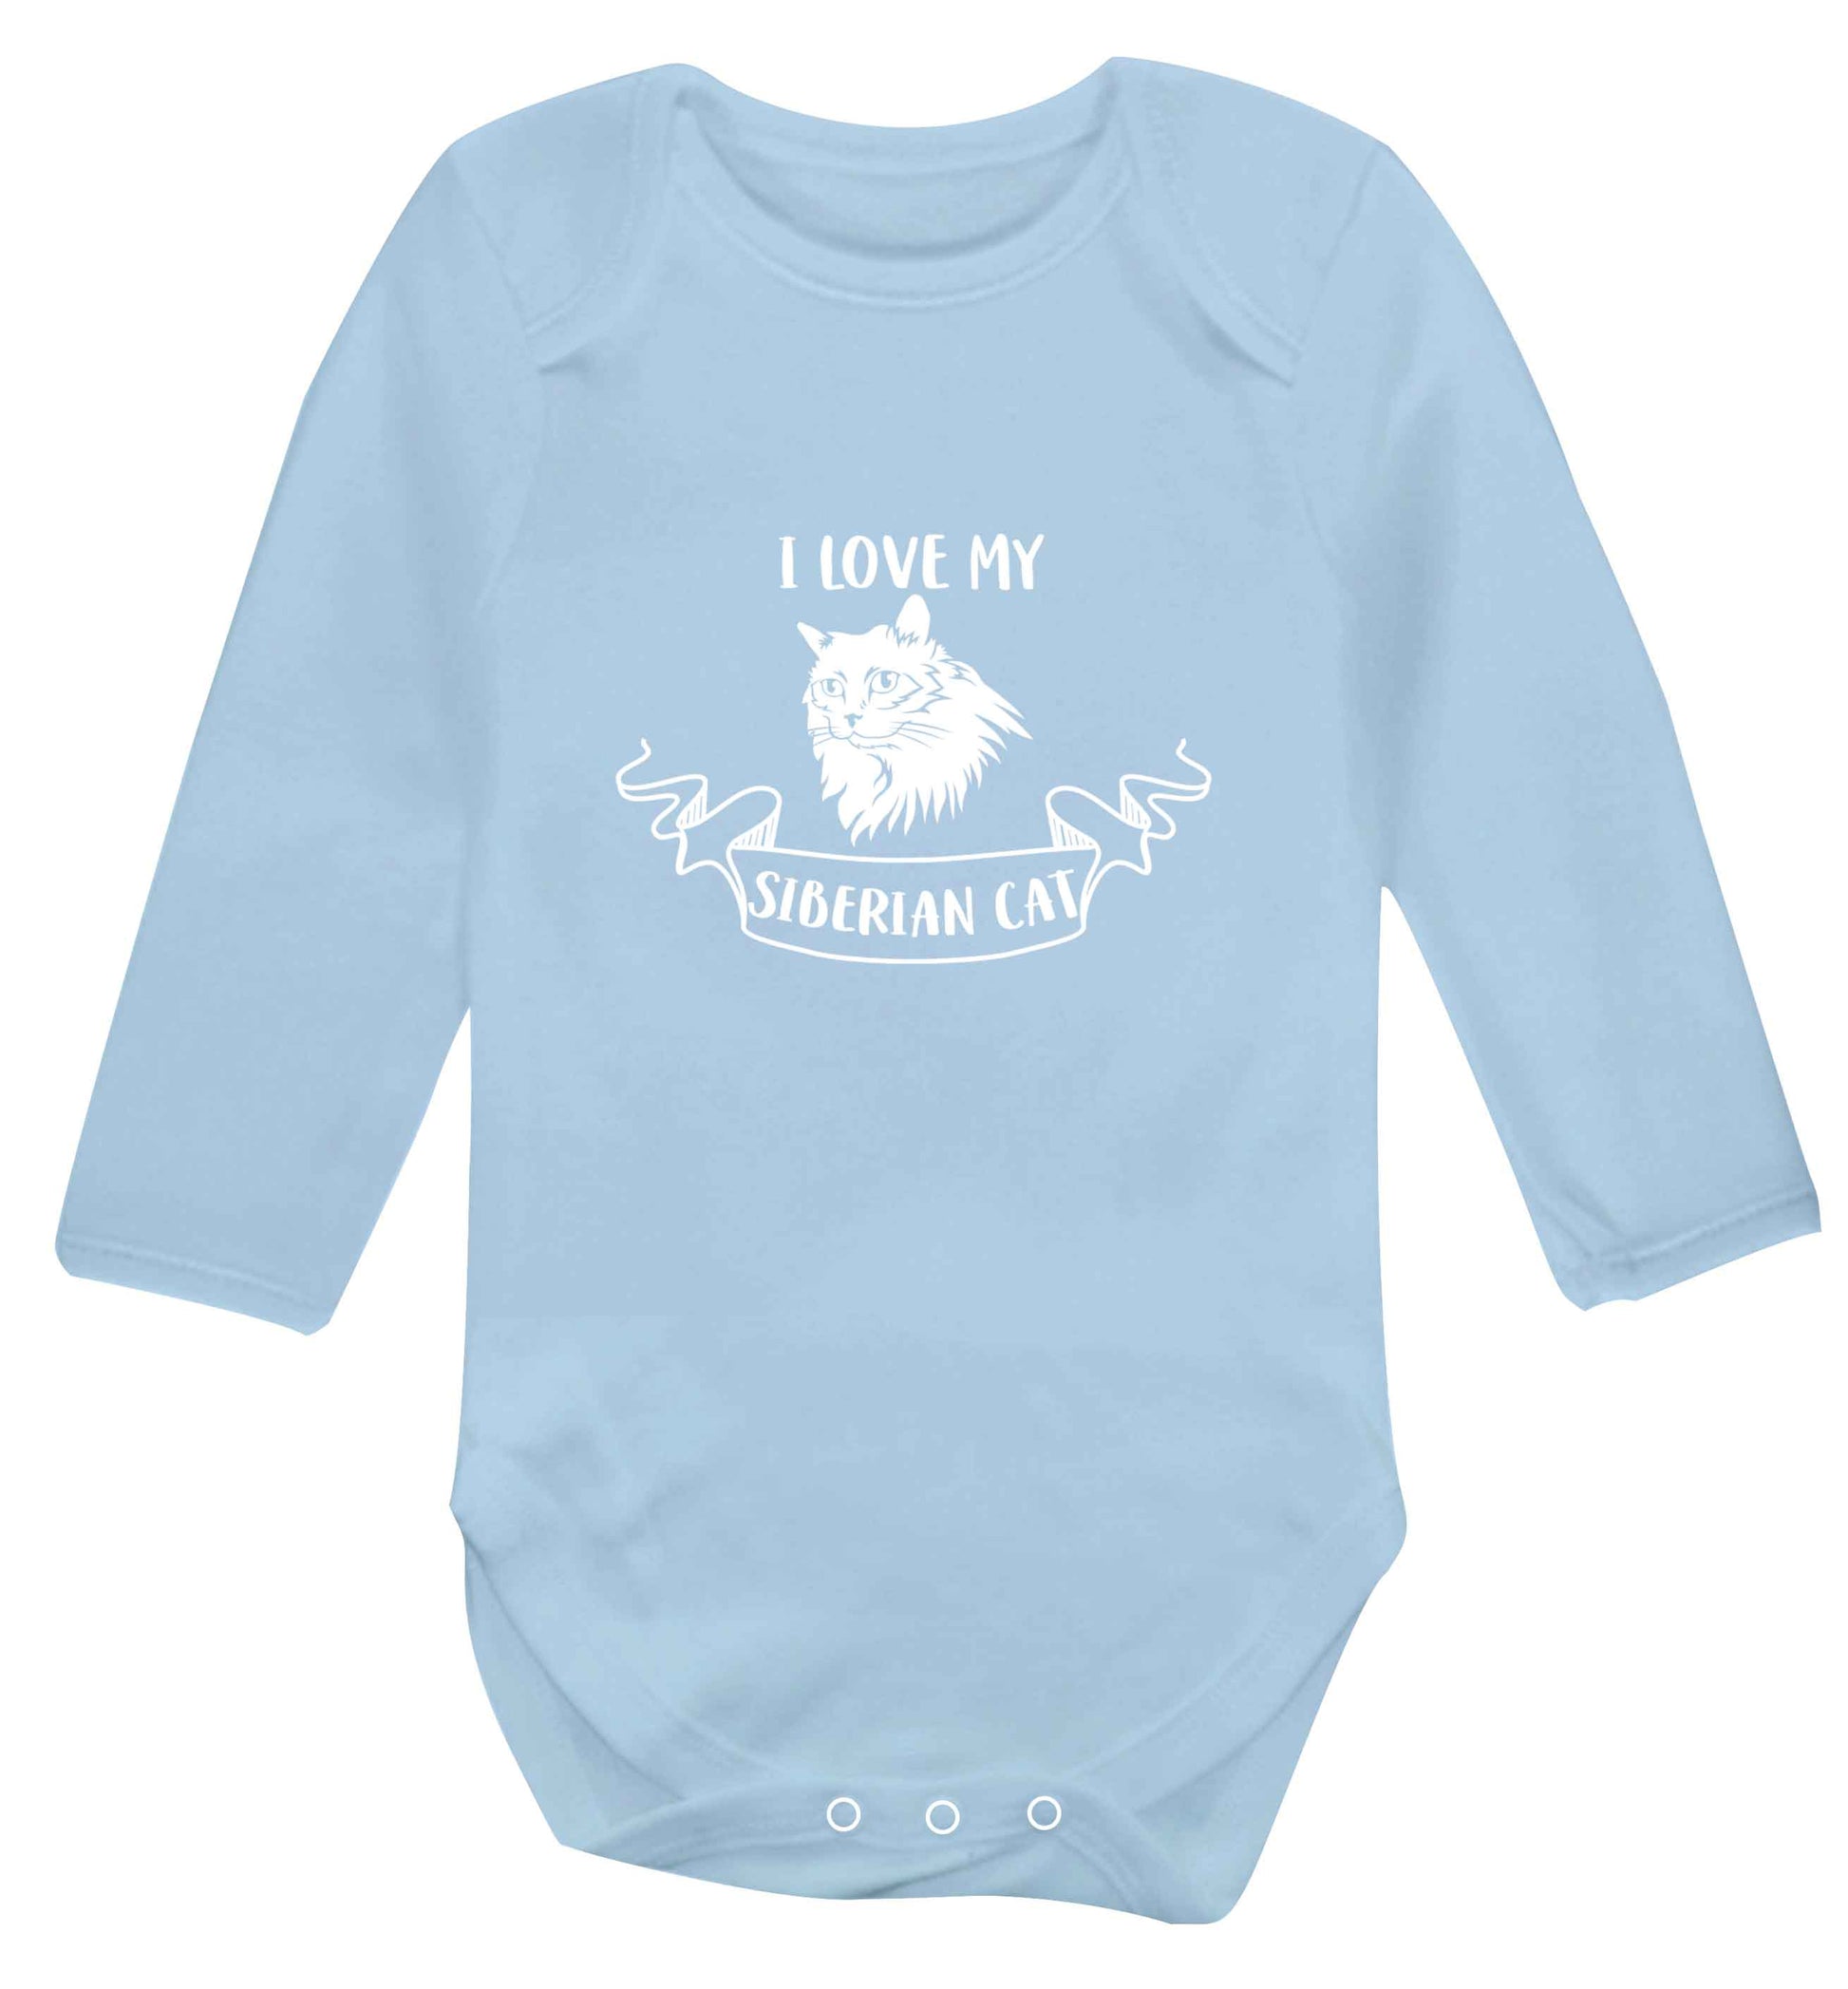 I love my siberian cat baby vest long sleeved pale blue 6-12 months